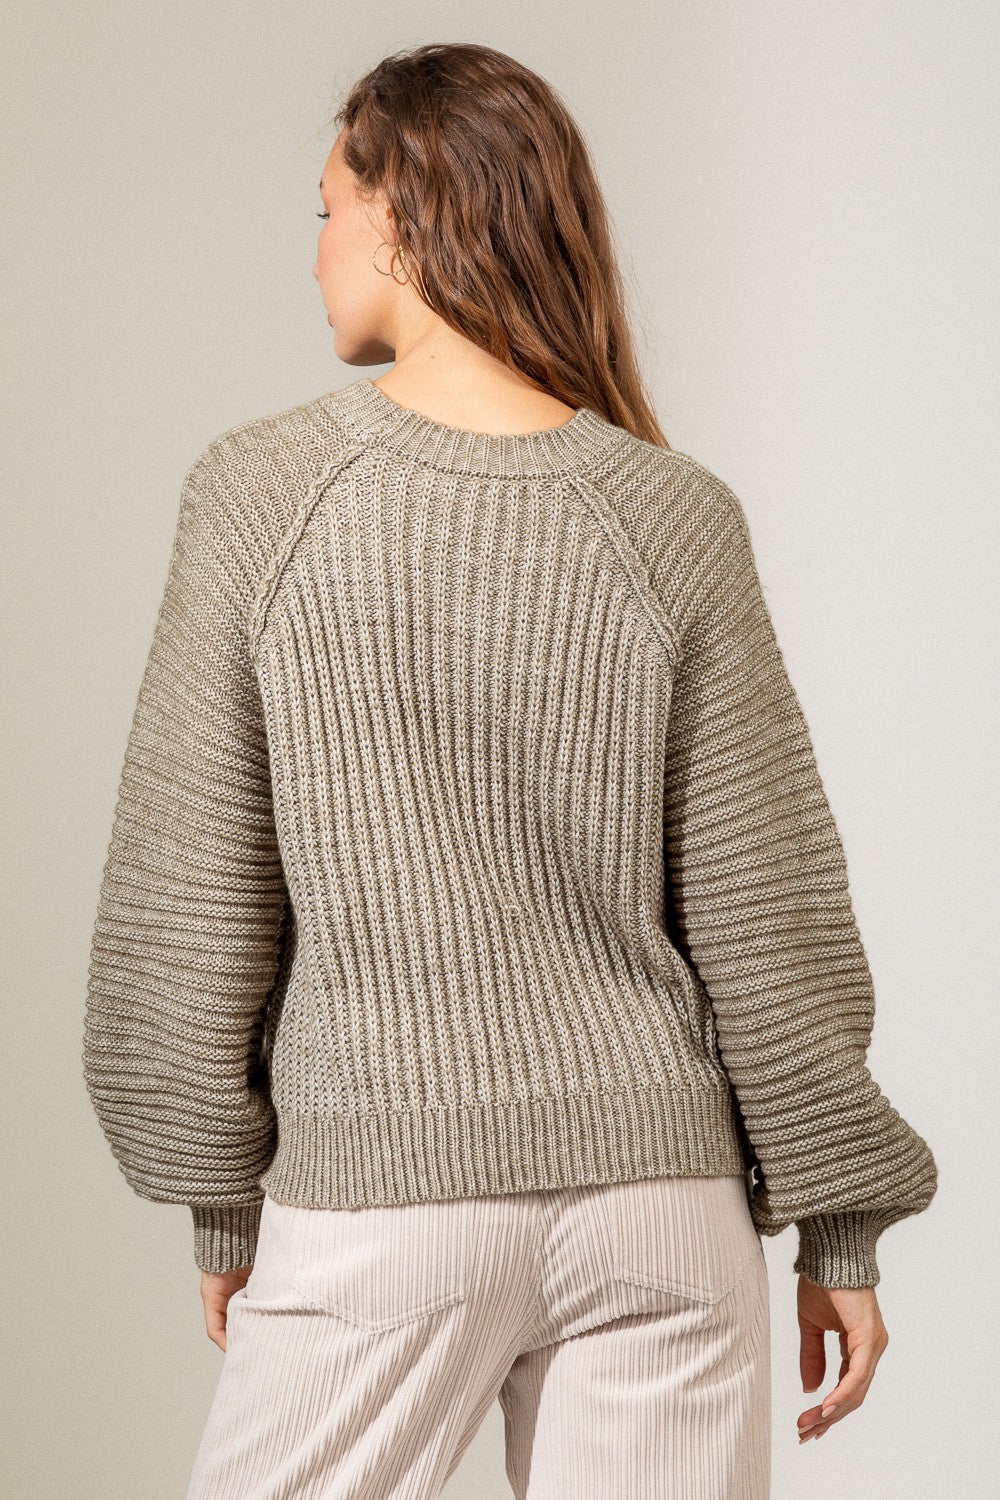 Hilda Sweater-Olive - Southern Grace Creations